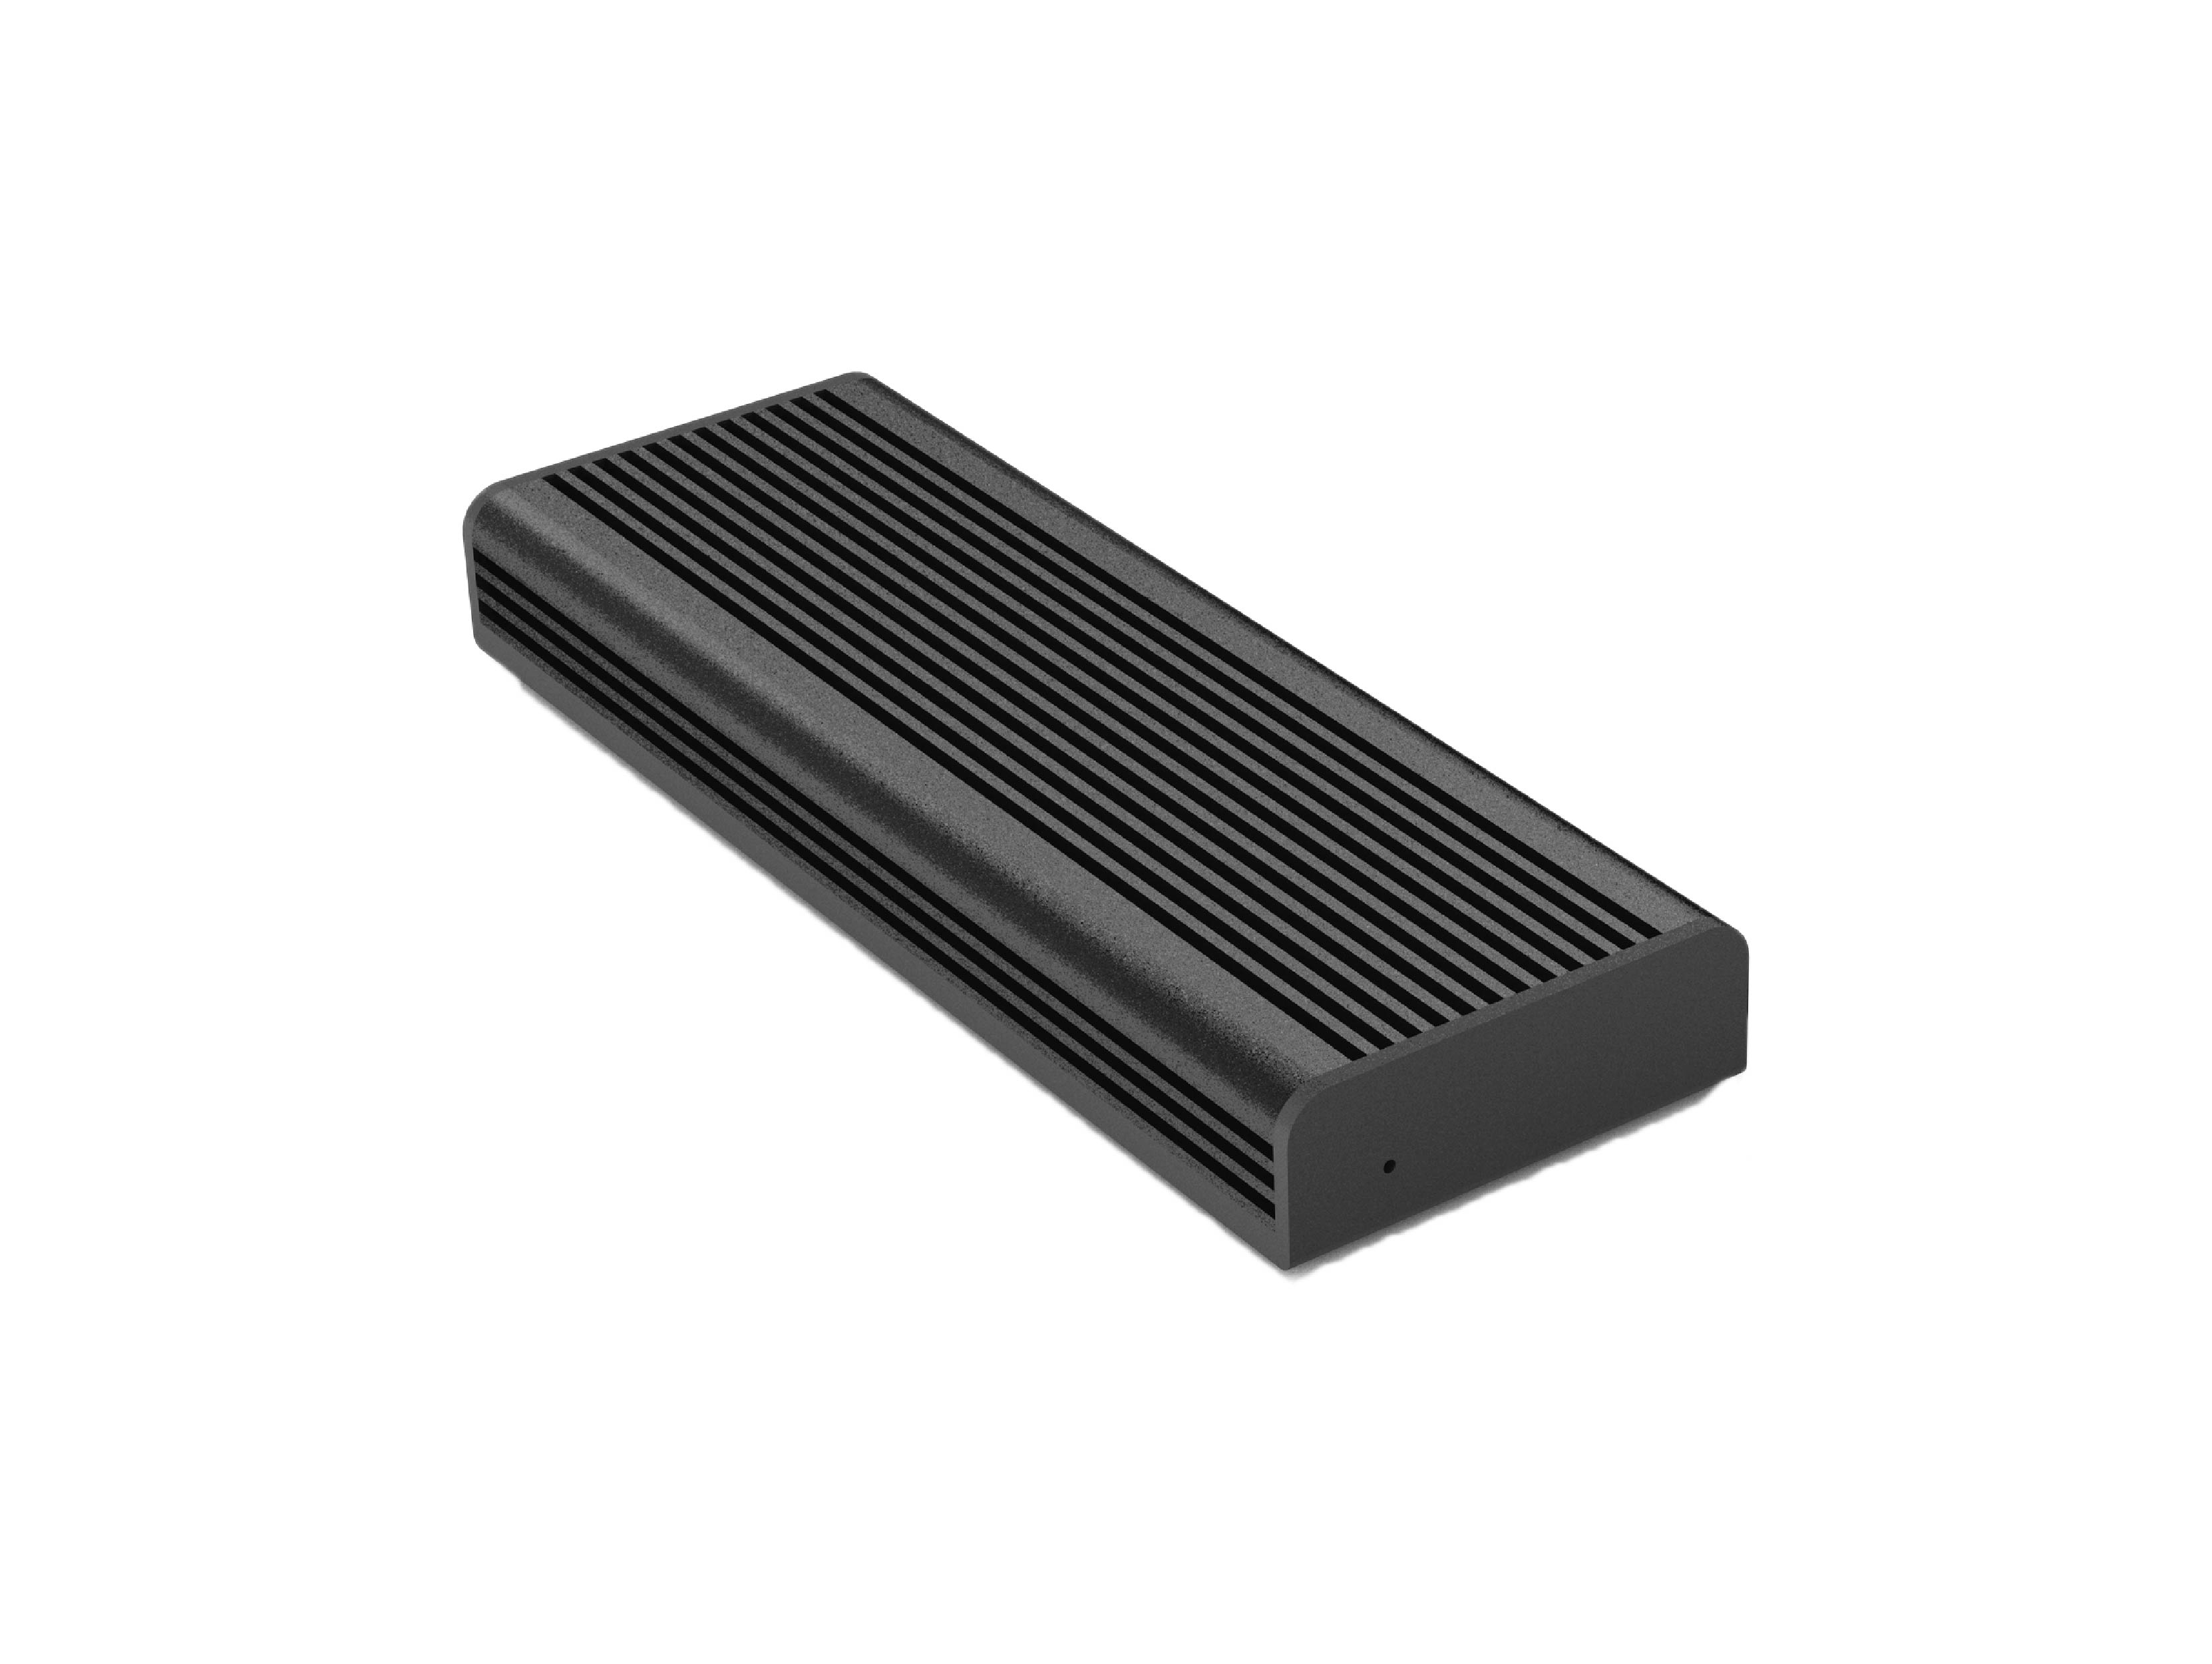 M.2 SSD Reader with Extra Storage Slot (SI-8008US31C), Support 1 M-key M.2 NVMe SSD 10Gbps, World patent, use the clips to switch SSDs, USB-C to host.